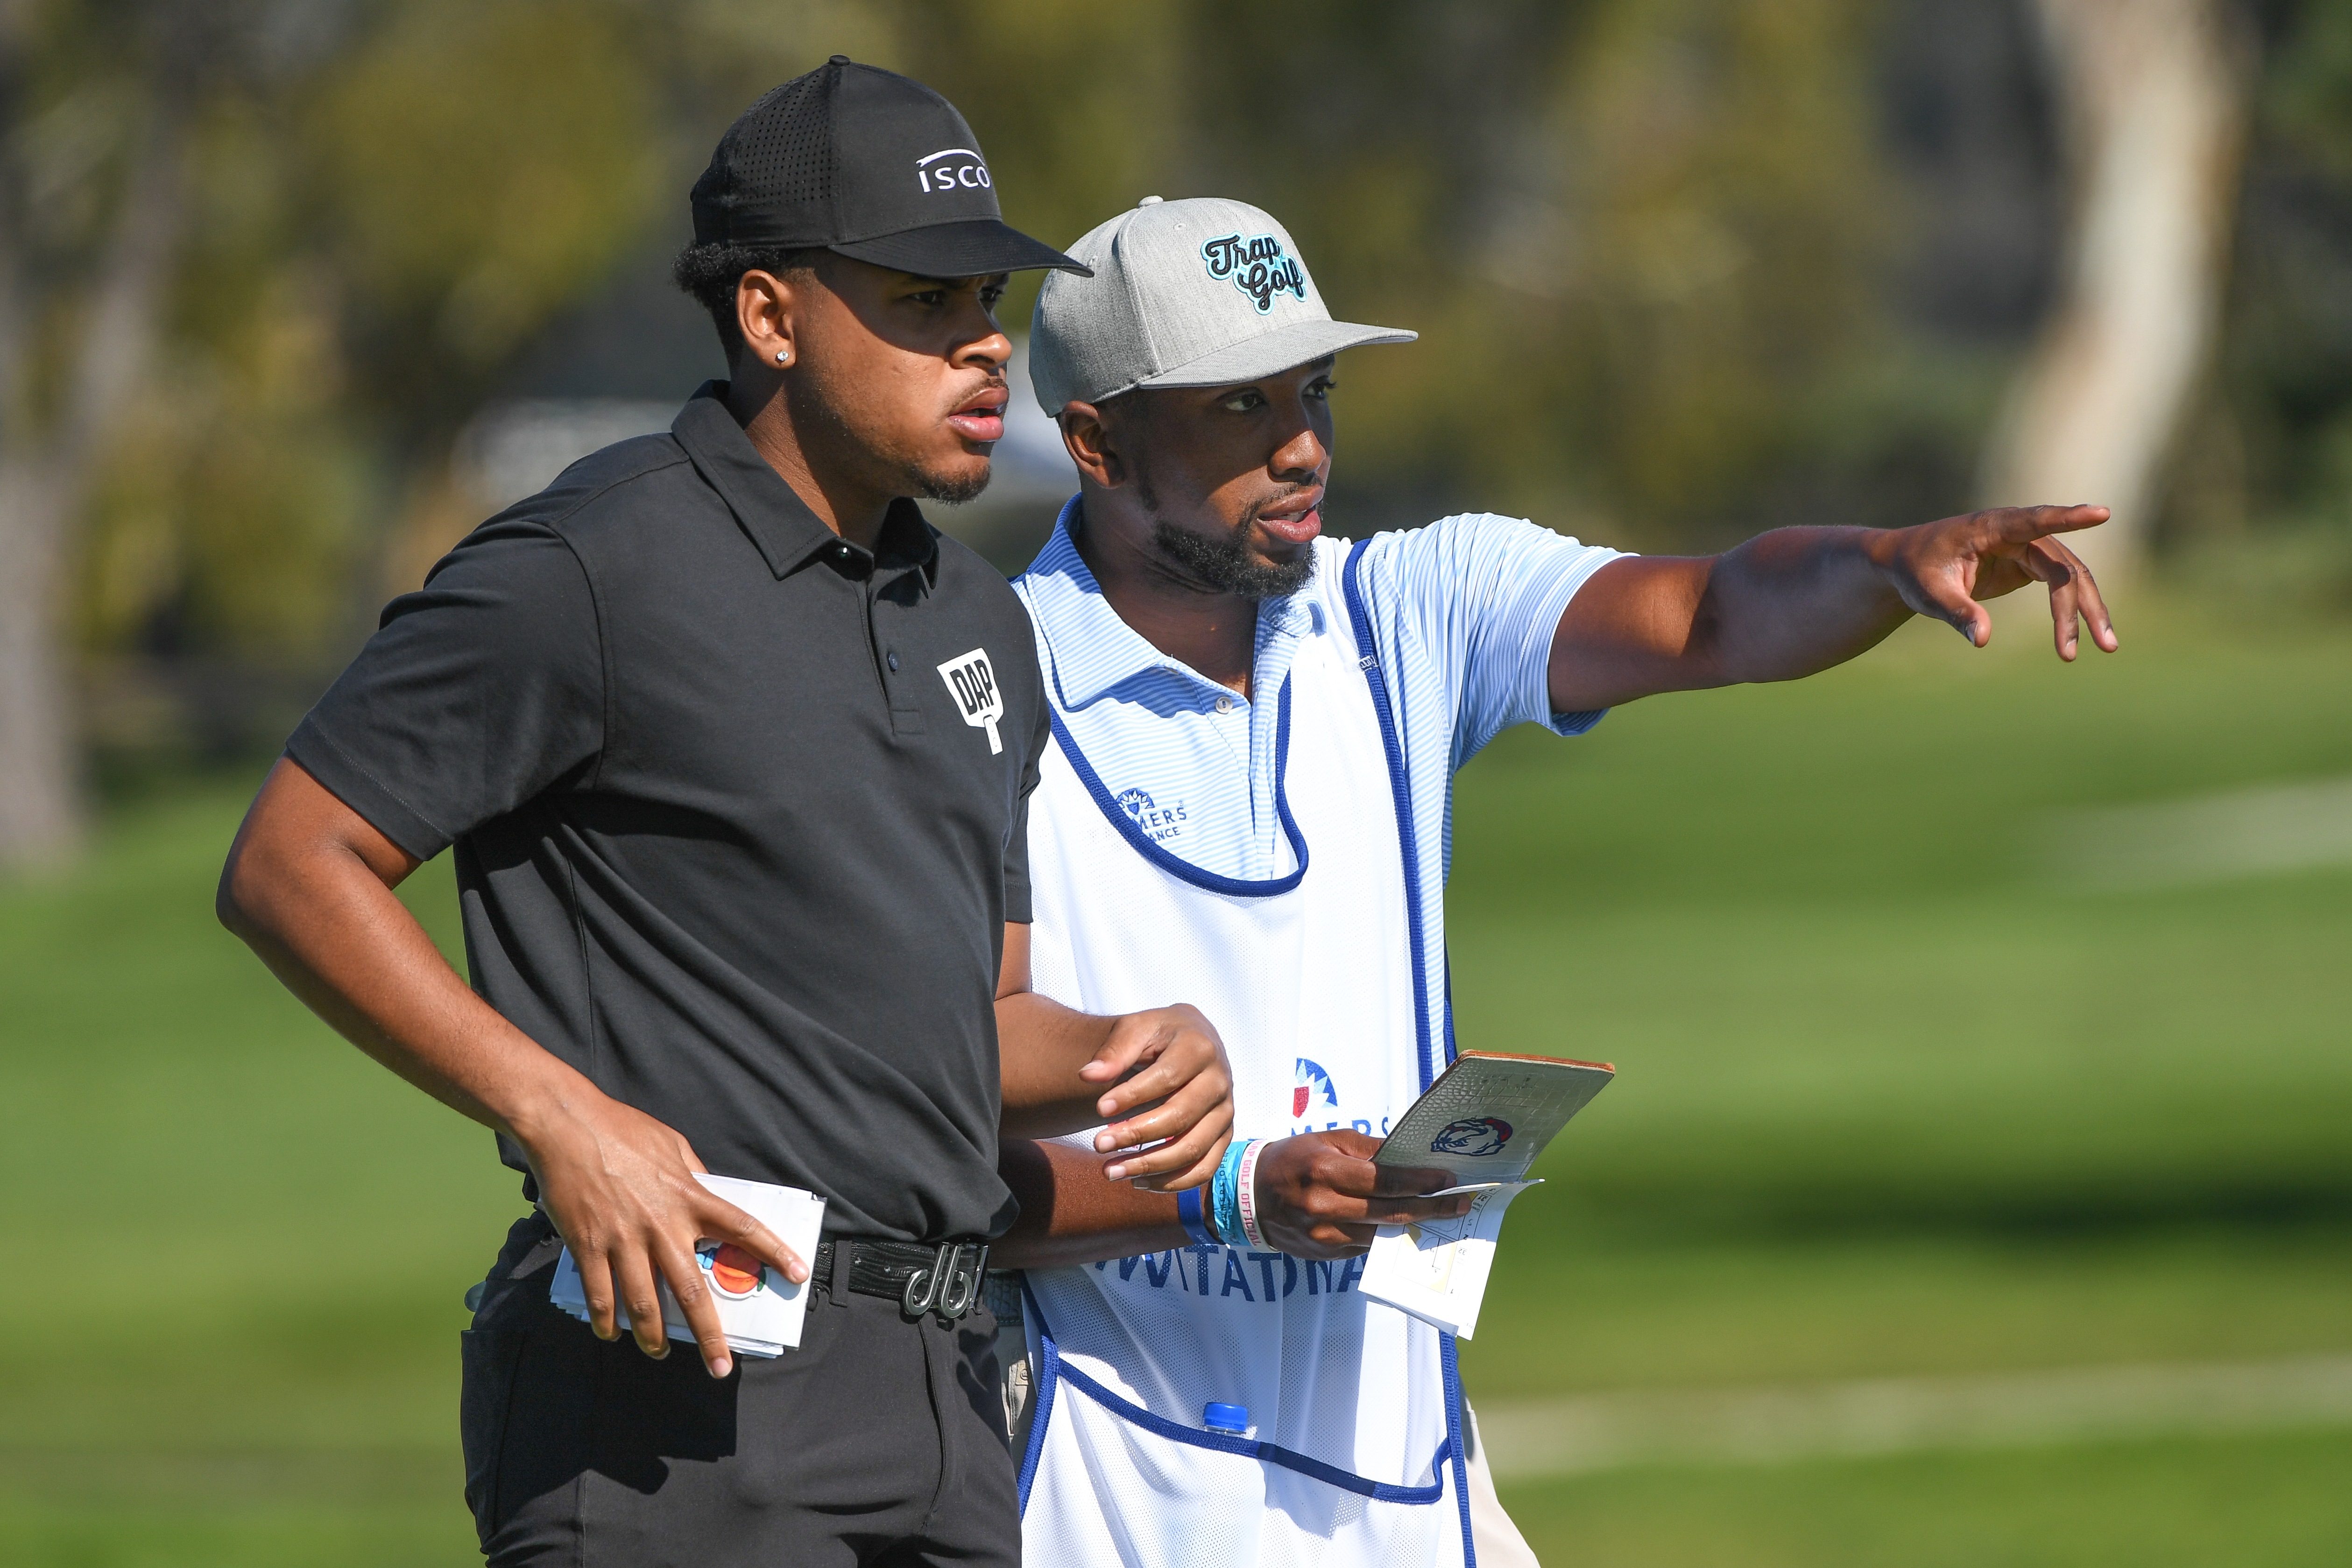 The APGA is back on TV at Torrey Pines and will celebrate a minority golfers victory Golf News and Tour Information GolfDigest